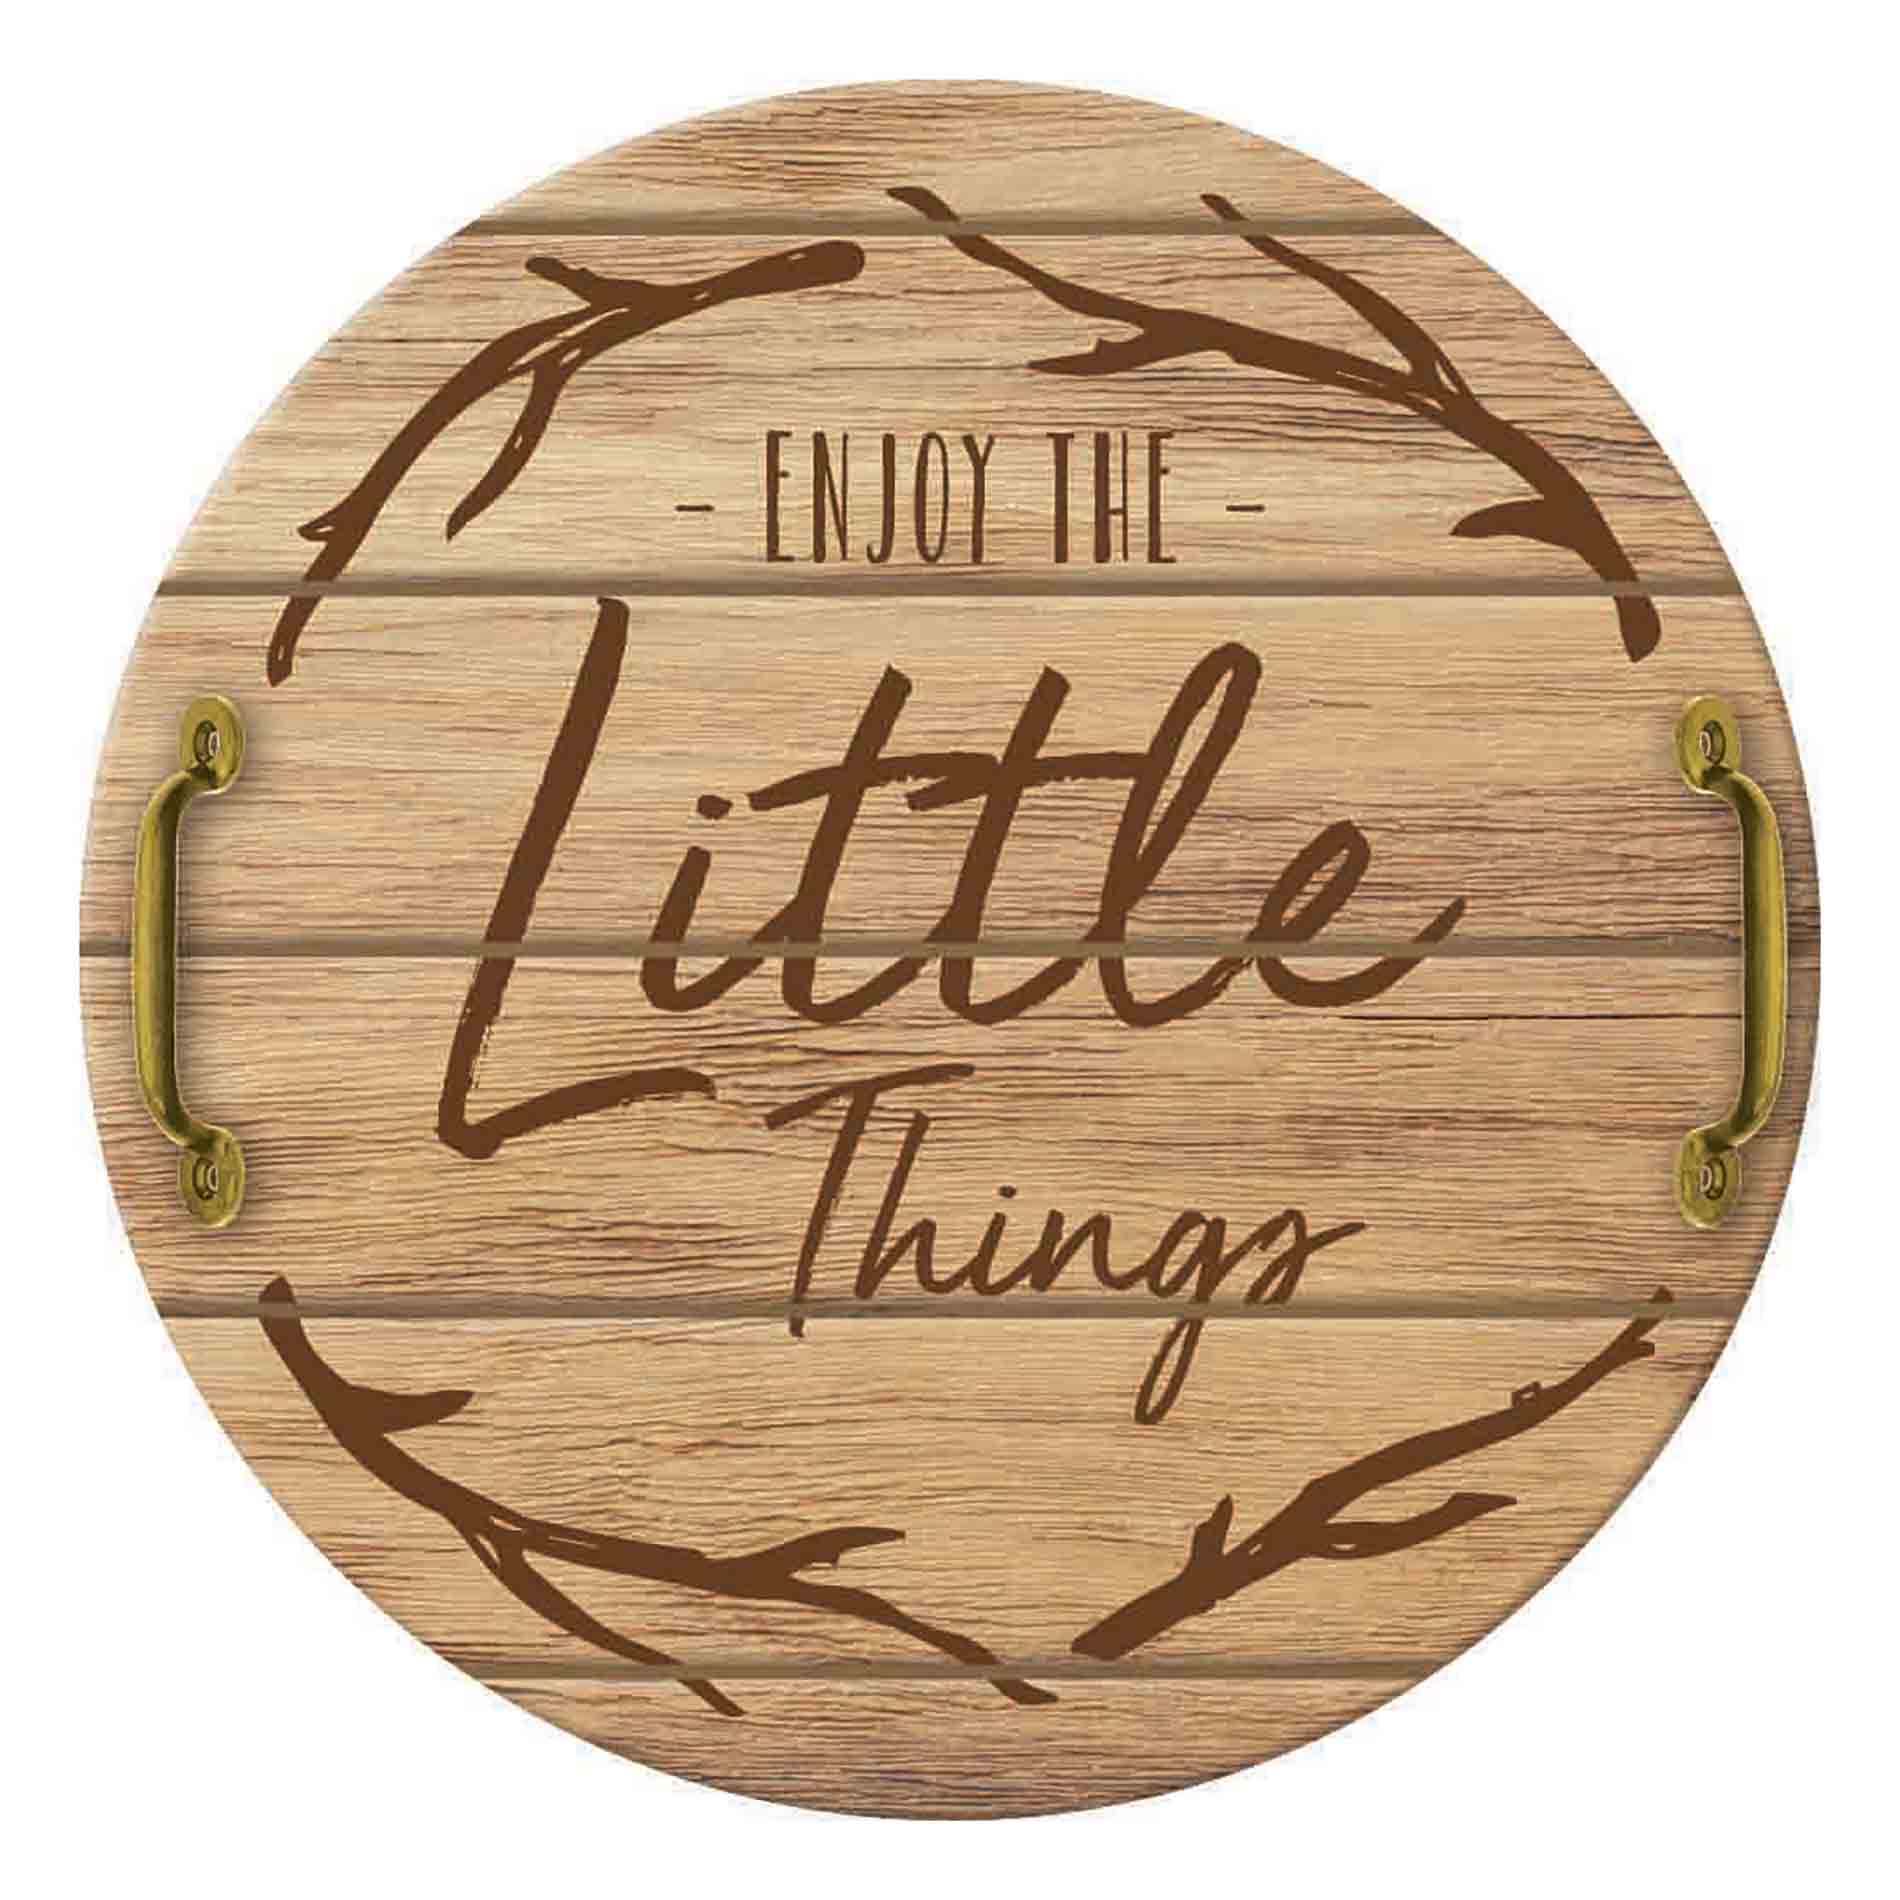 Enjoy The Little Things Tray with Handles